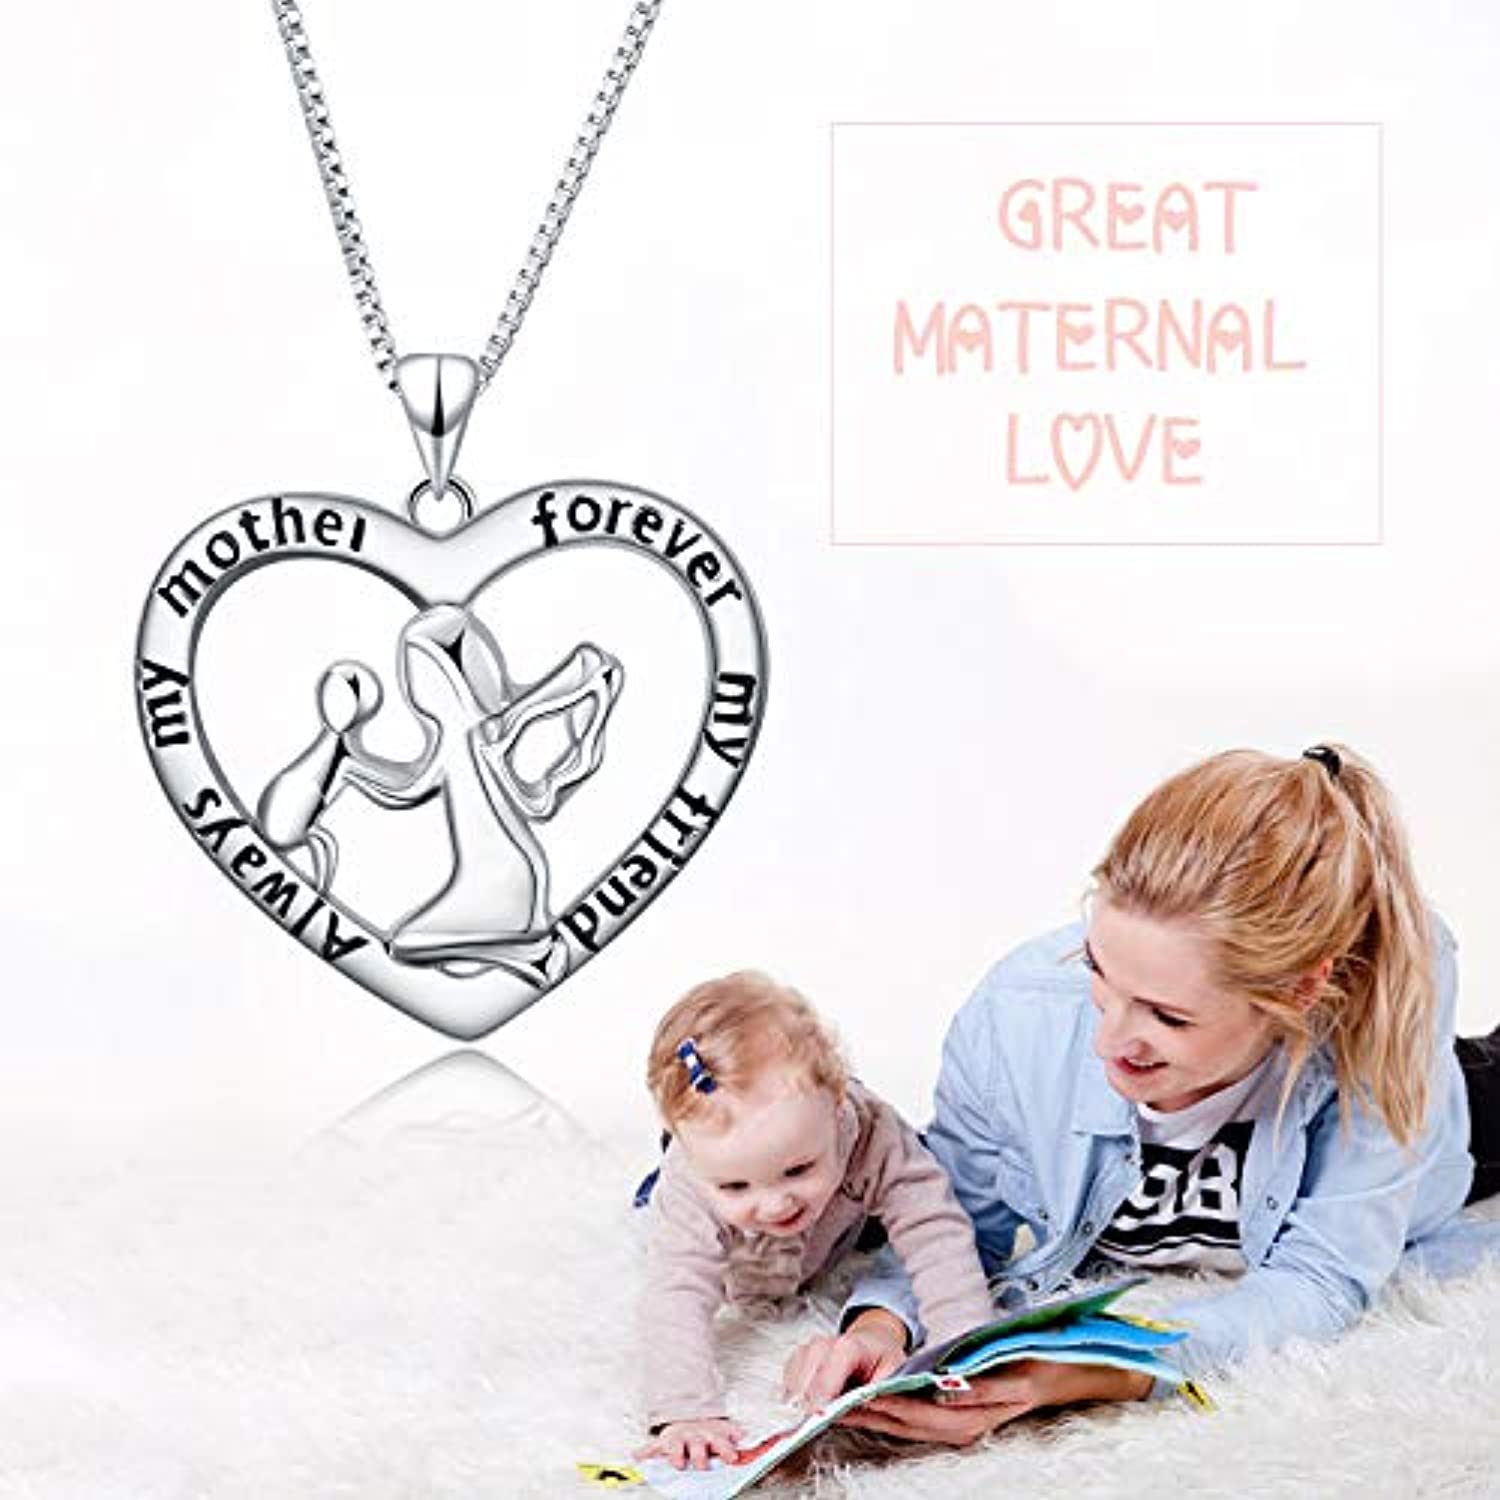 Angel caller Mother Daughter Jewelry Necklace Sterling Silver Love Heart Mother and Child Jewelry for Women Girls